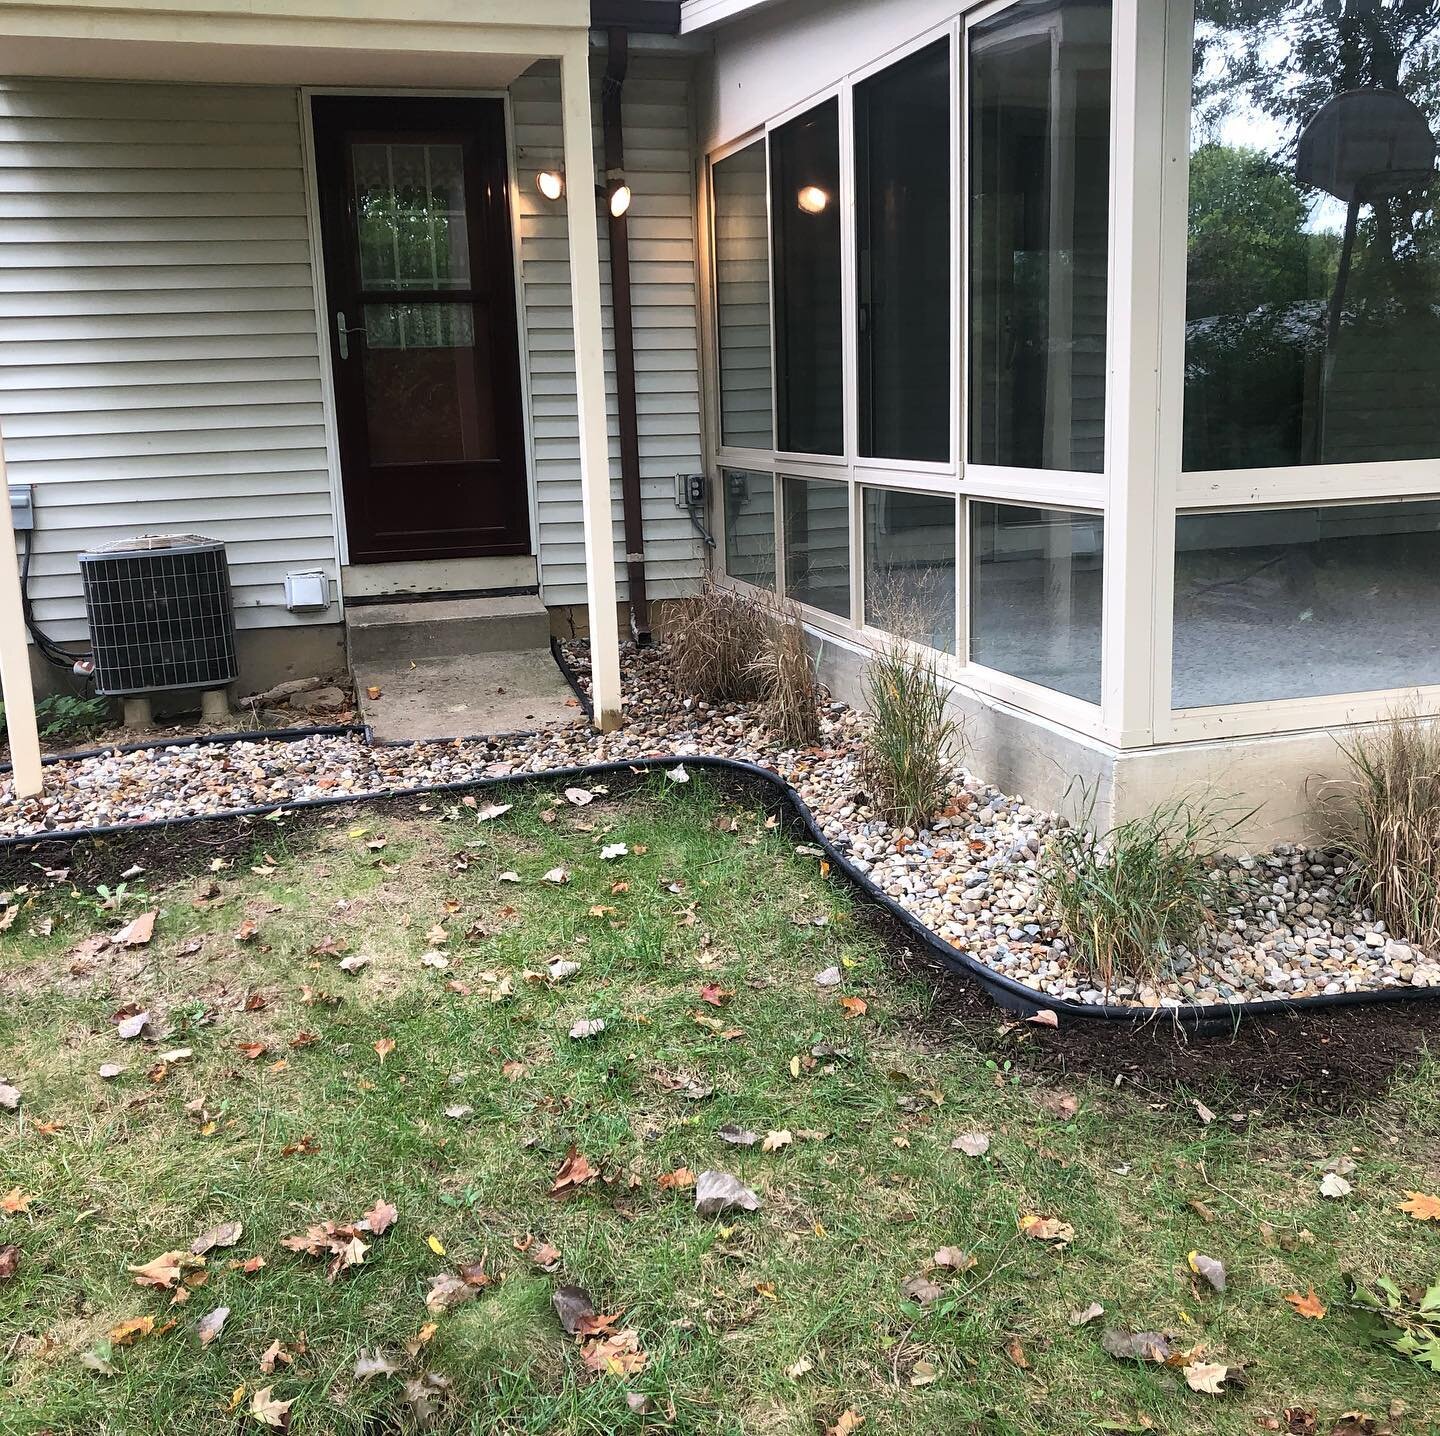 Defined beds, laid rock and planted ornamental grasses